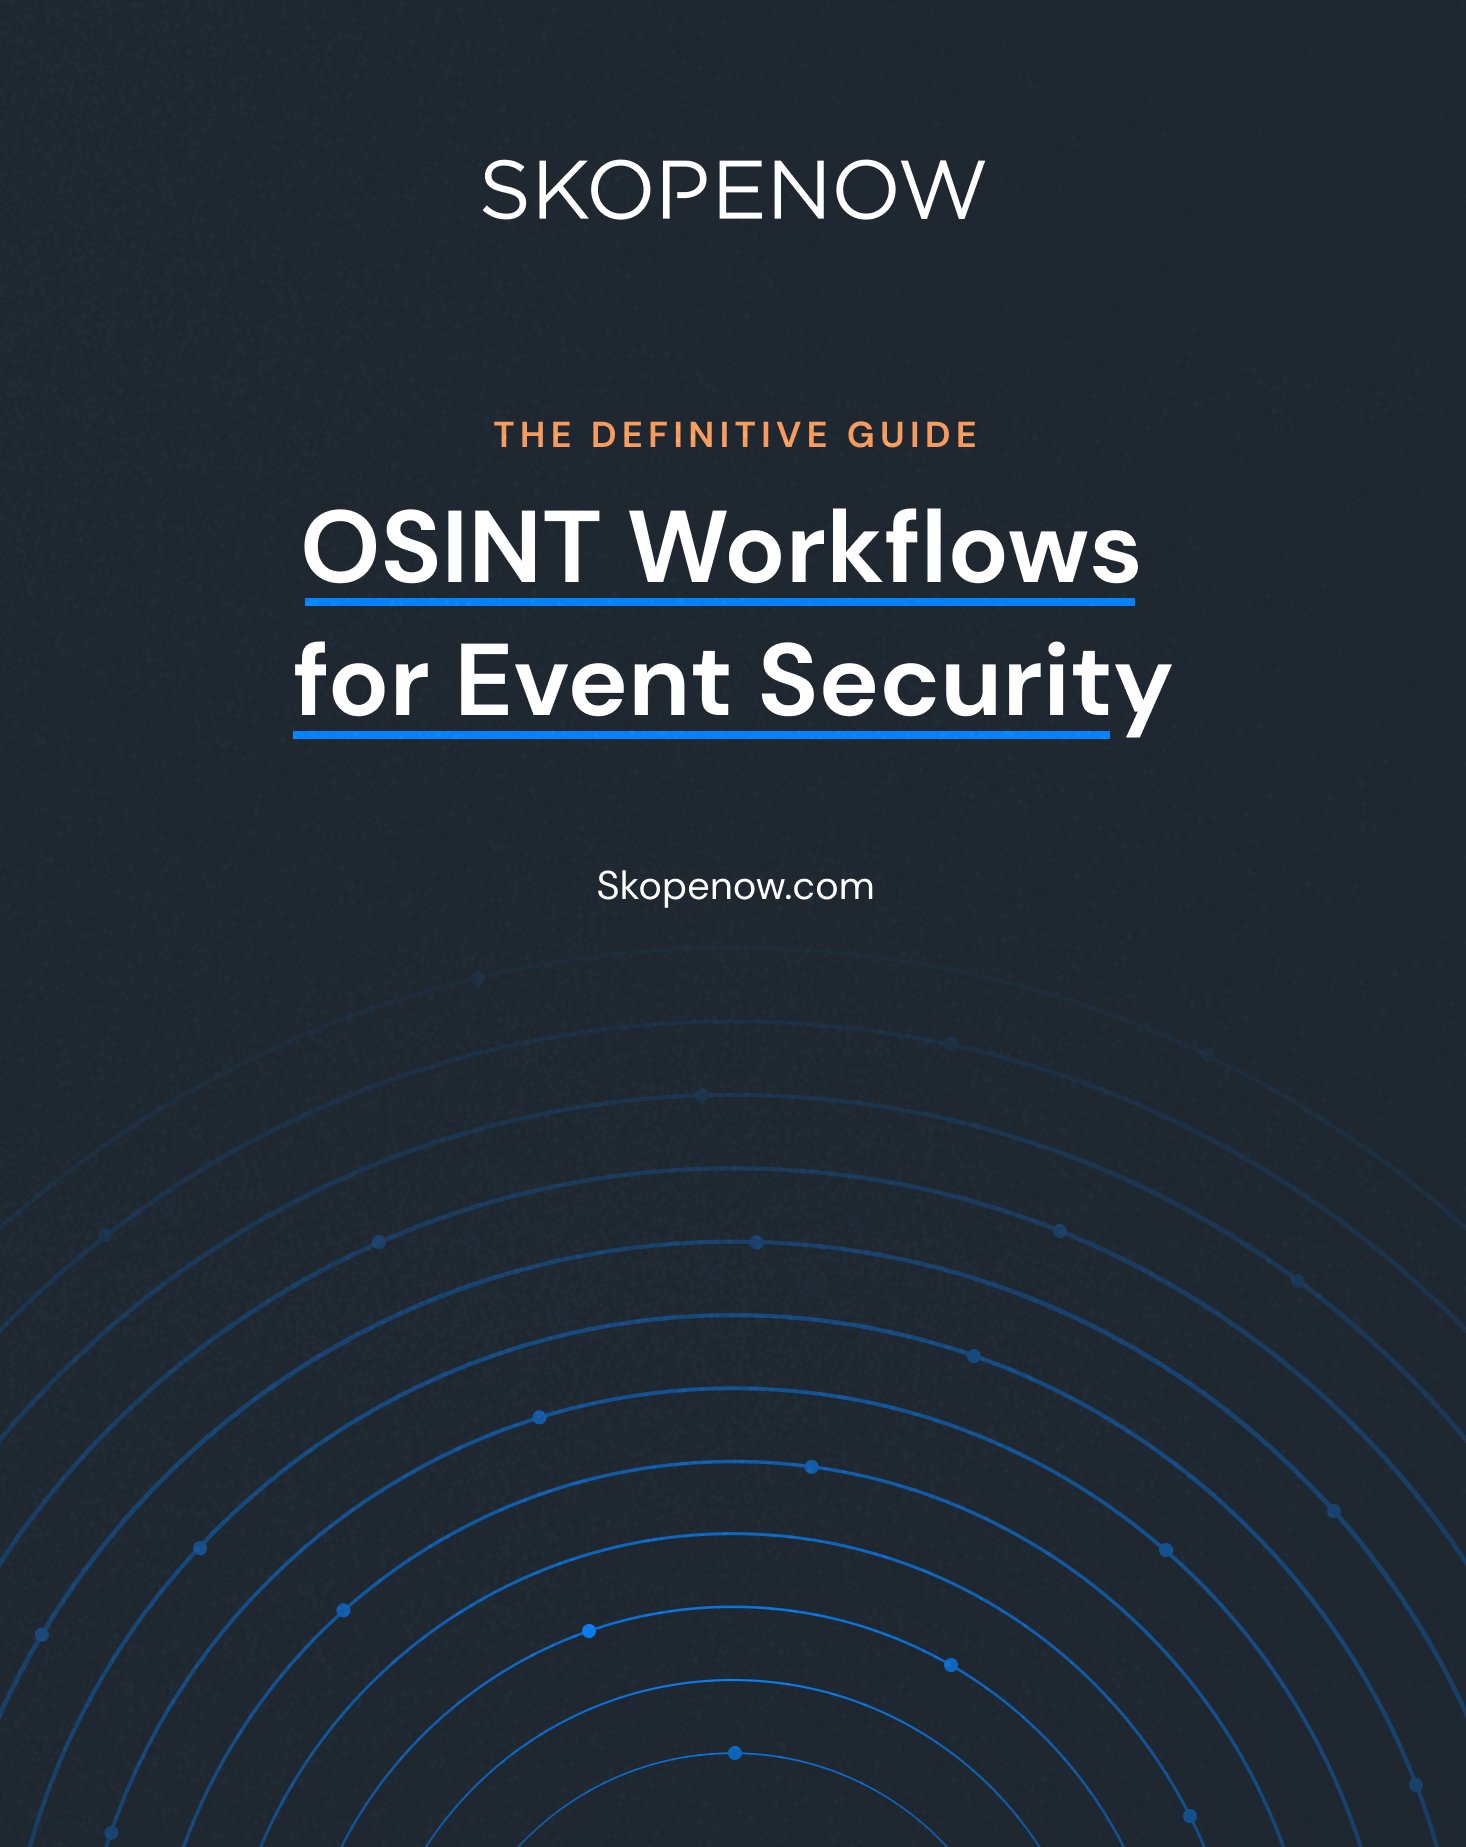 The Definitive Guide: OSINT Workflows for Event Security